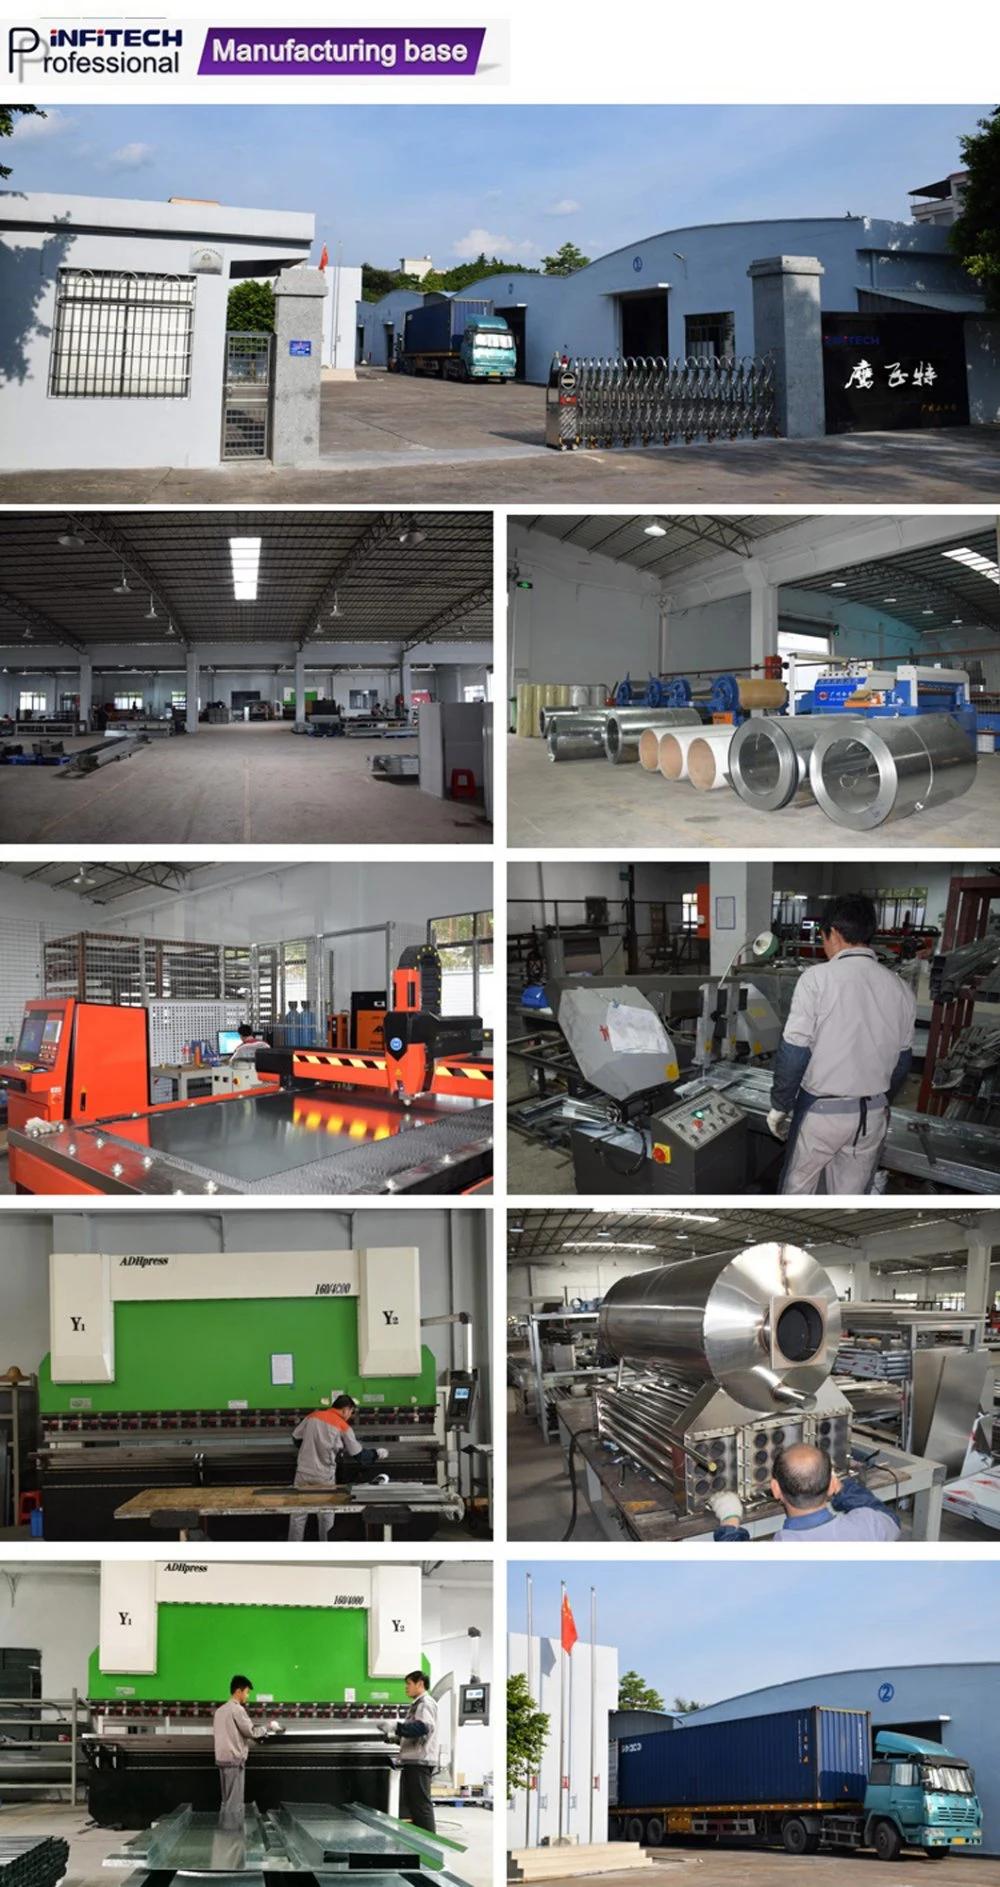 High Quality Diesel Burner Auto Spray Booth Painting Drying Rooms